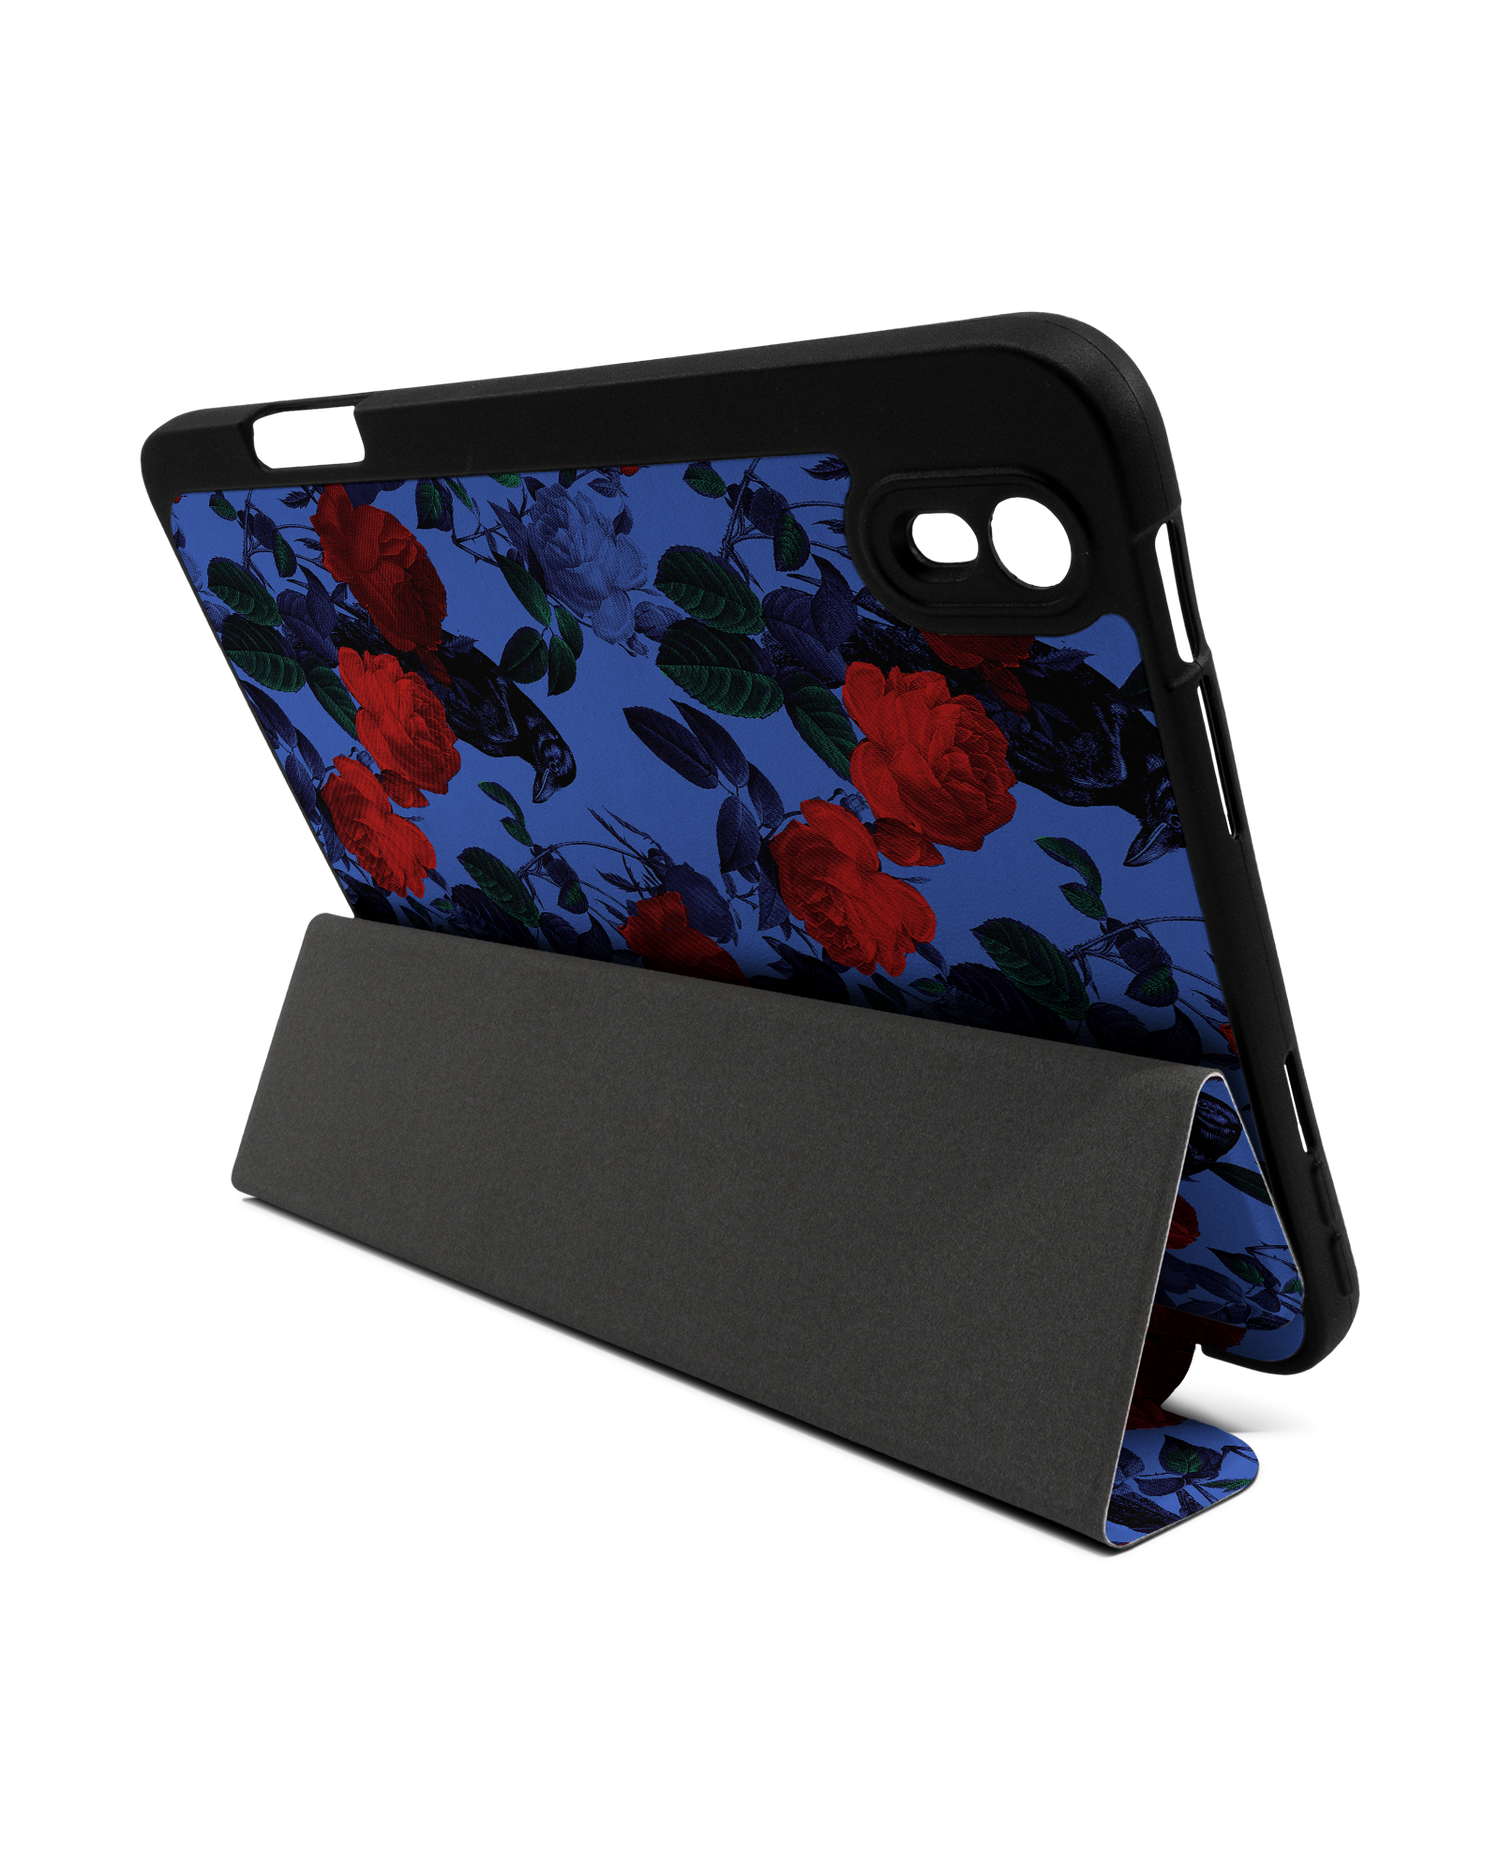 Roses And Ravens iPad Case with Pencil Holder Apple iPad mini 6 (2021): Set up in landscape format (back view)